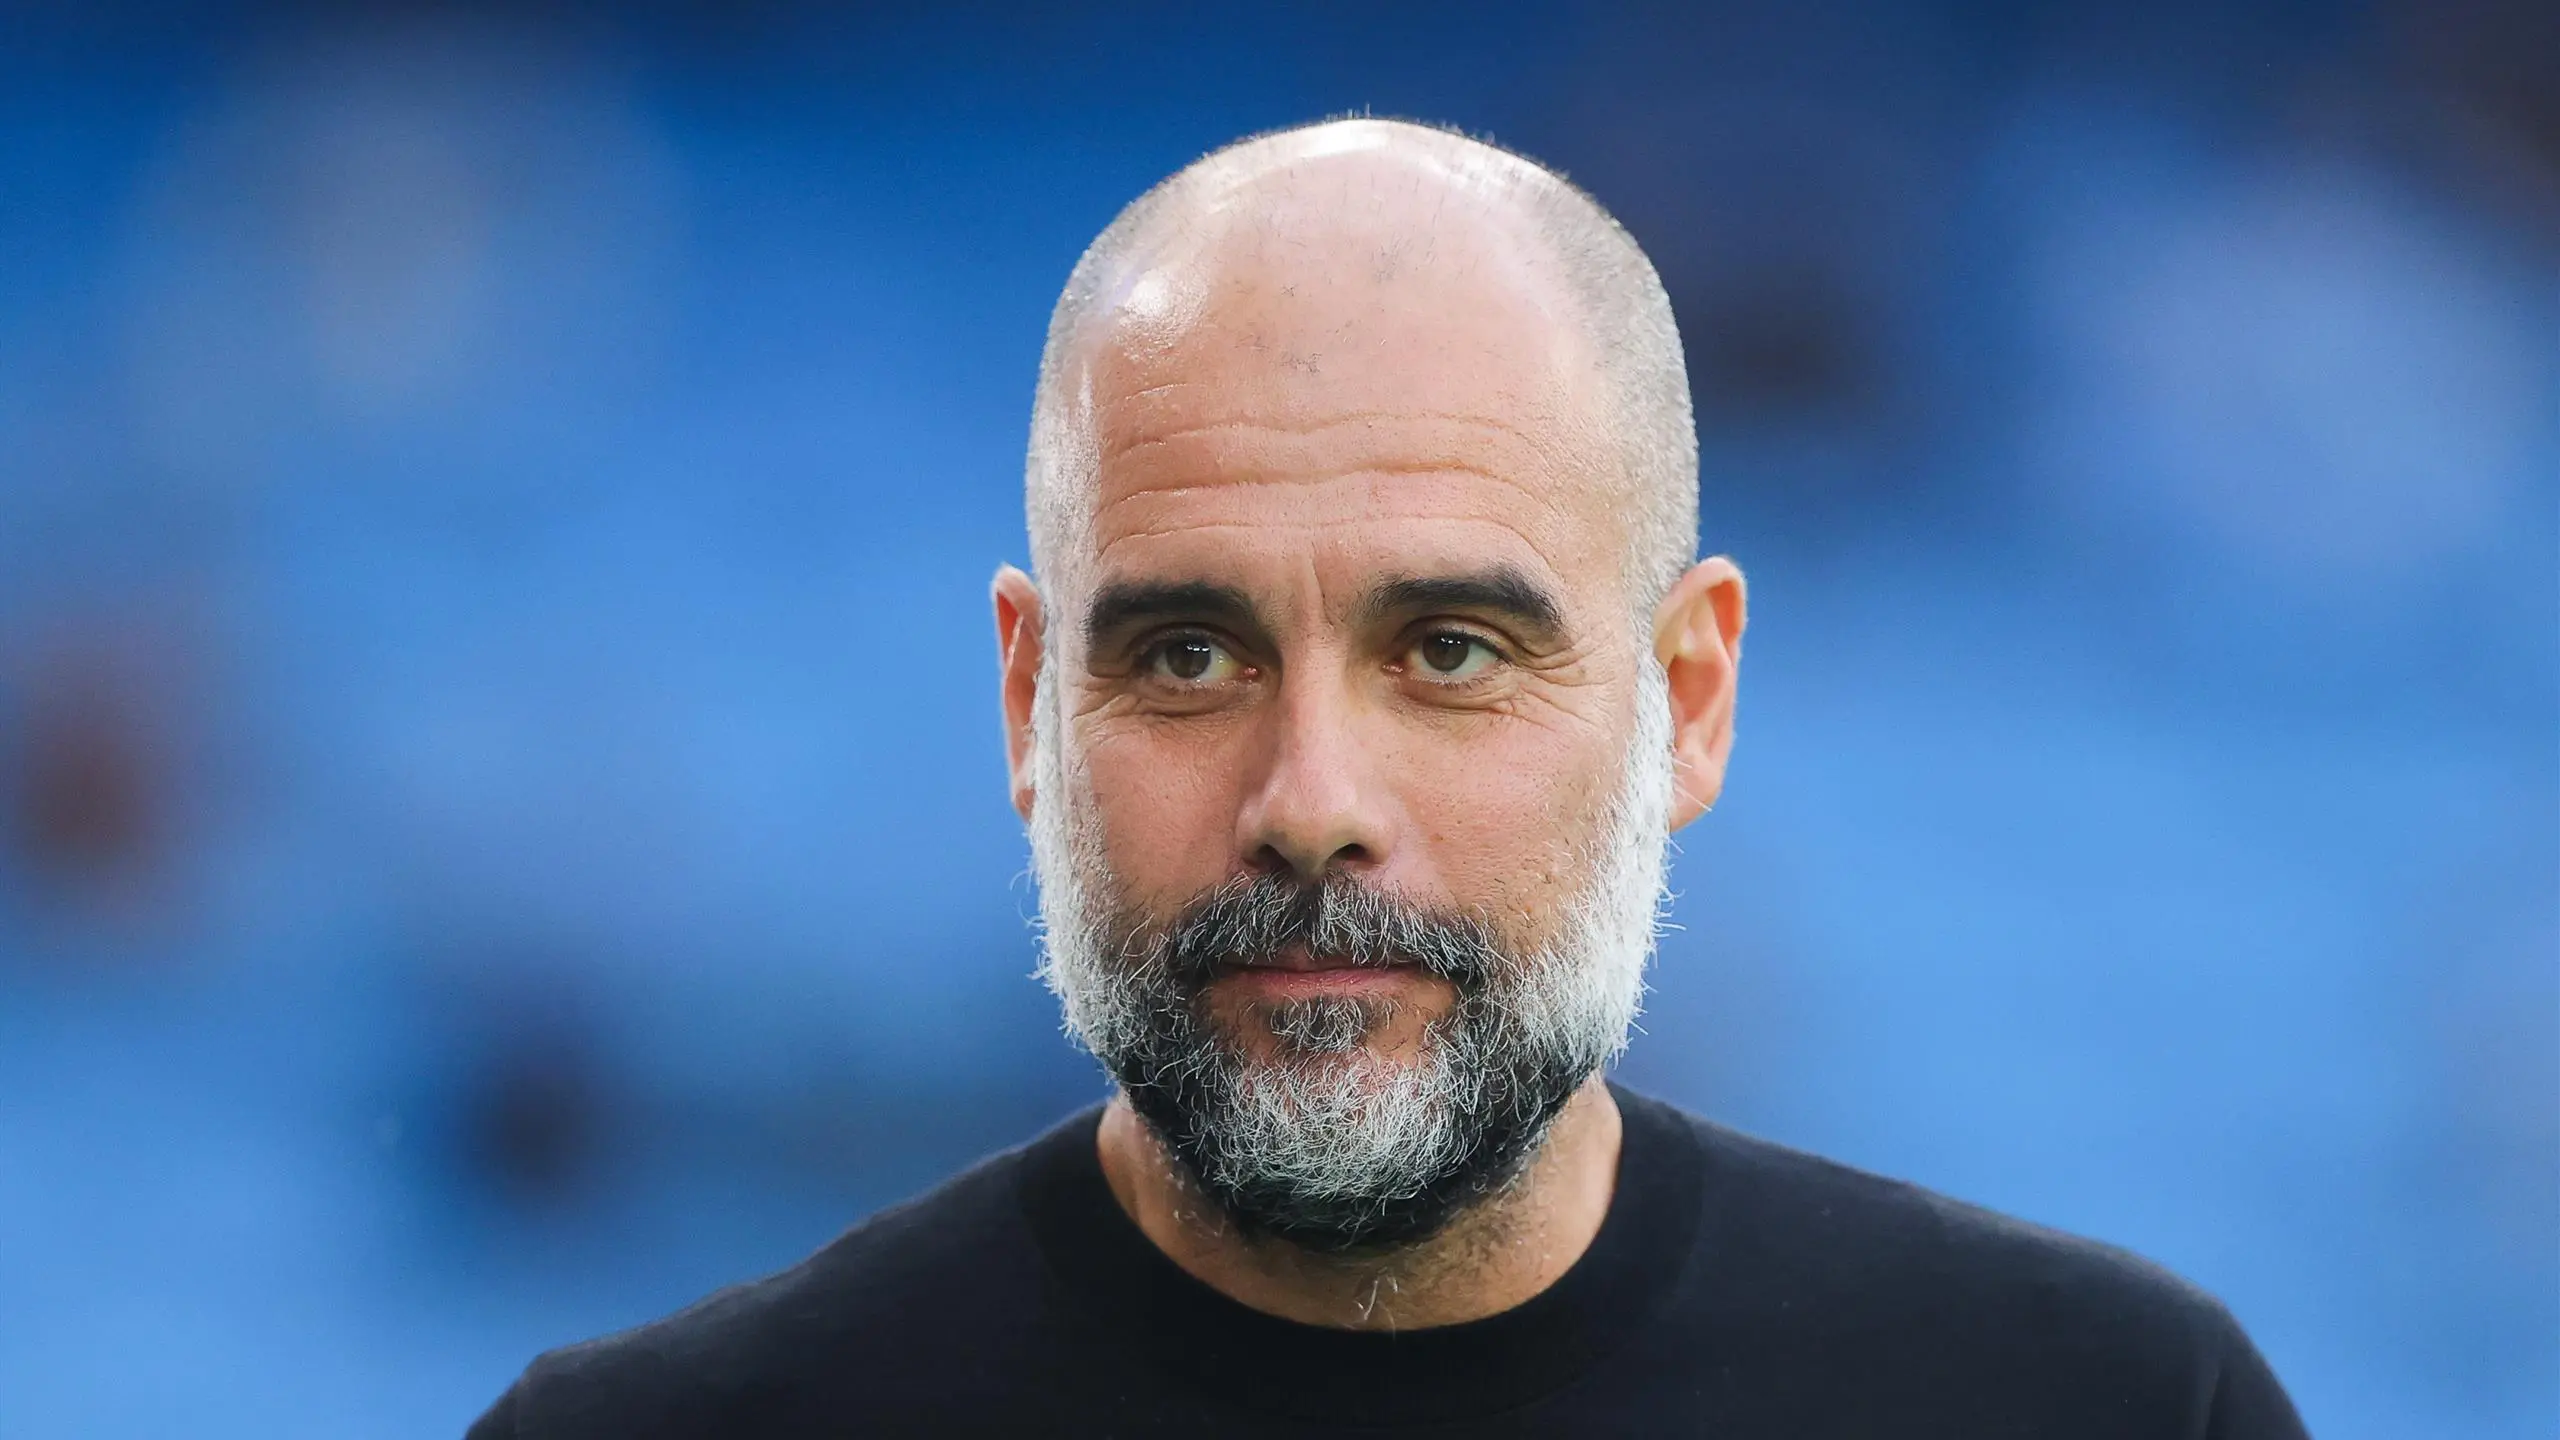 EPL: Referee would be disappointed if he played for Man City against Tottenham - Guardiola